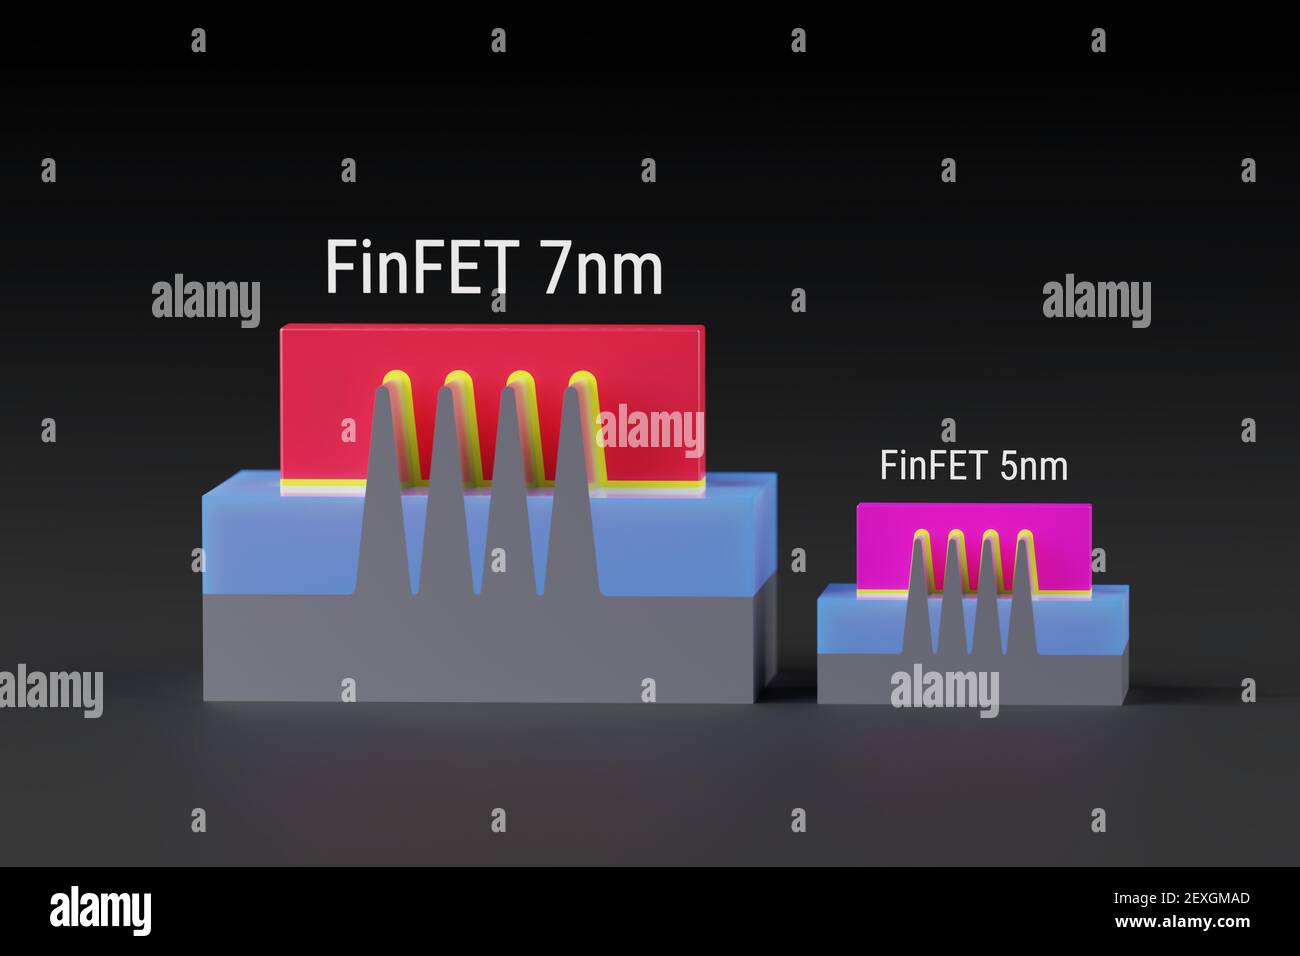 Comparison of FinFET transistors for 7nm and 5nm technology node of chip manufacturing process. 3D models compare the size and area. Illustration for Stock Photo